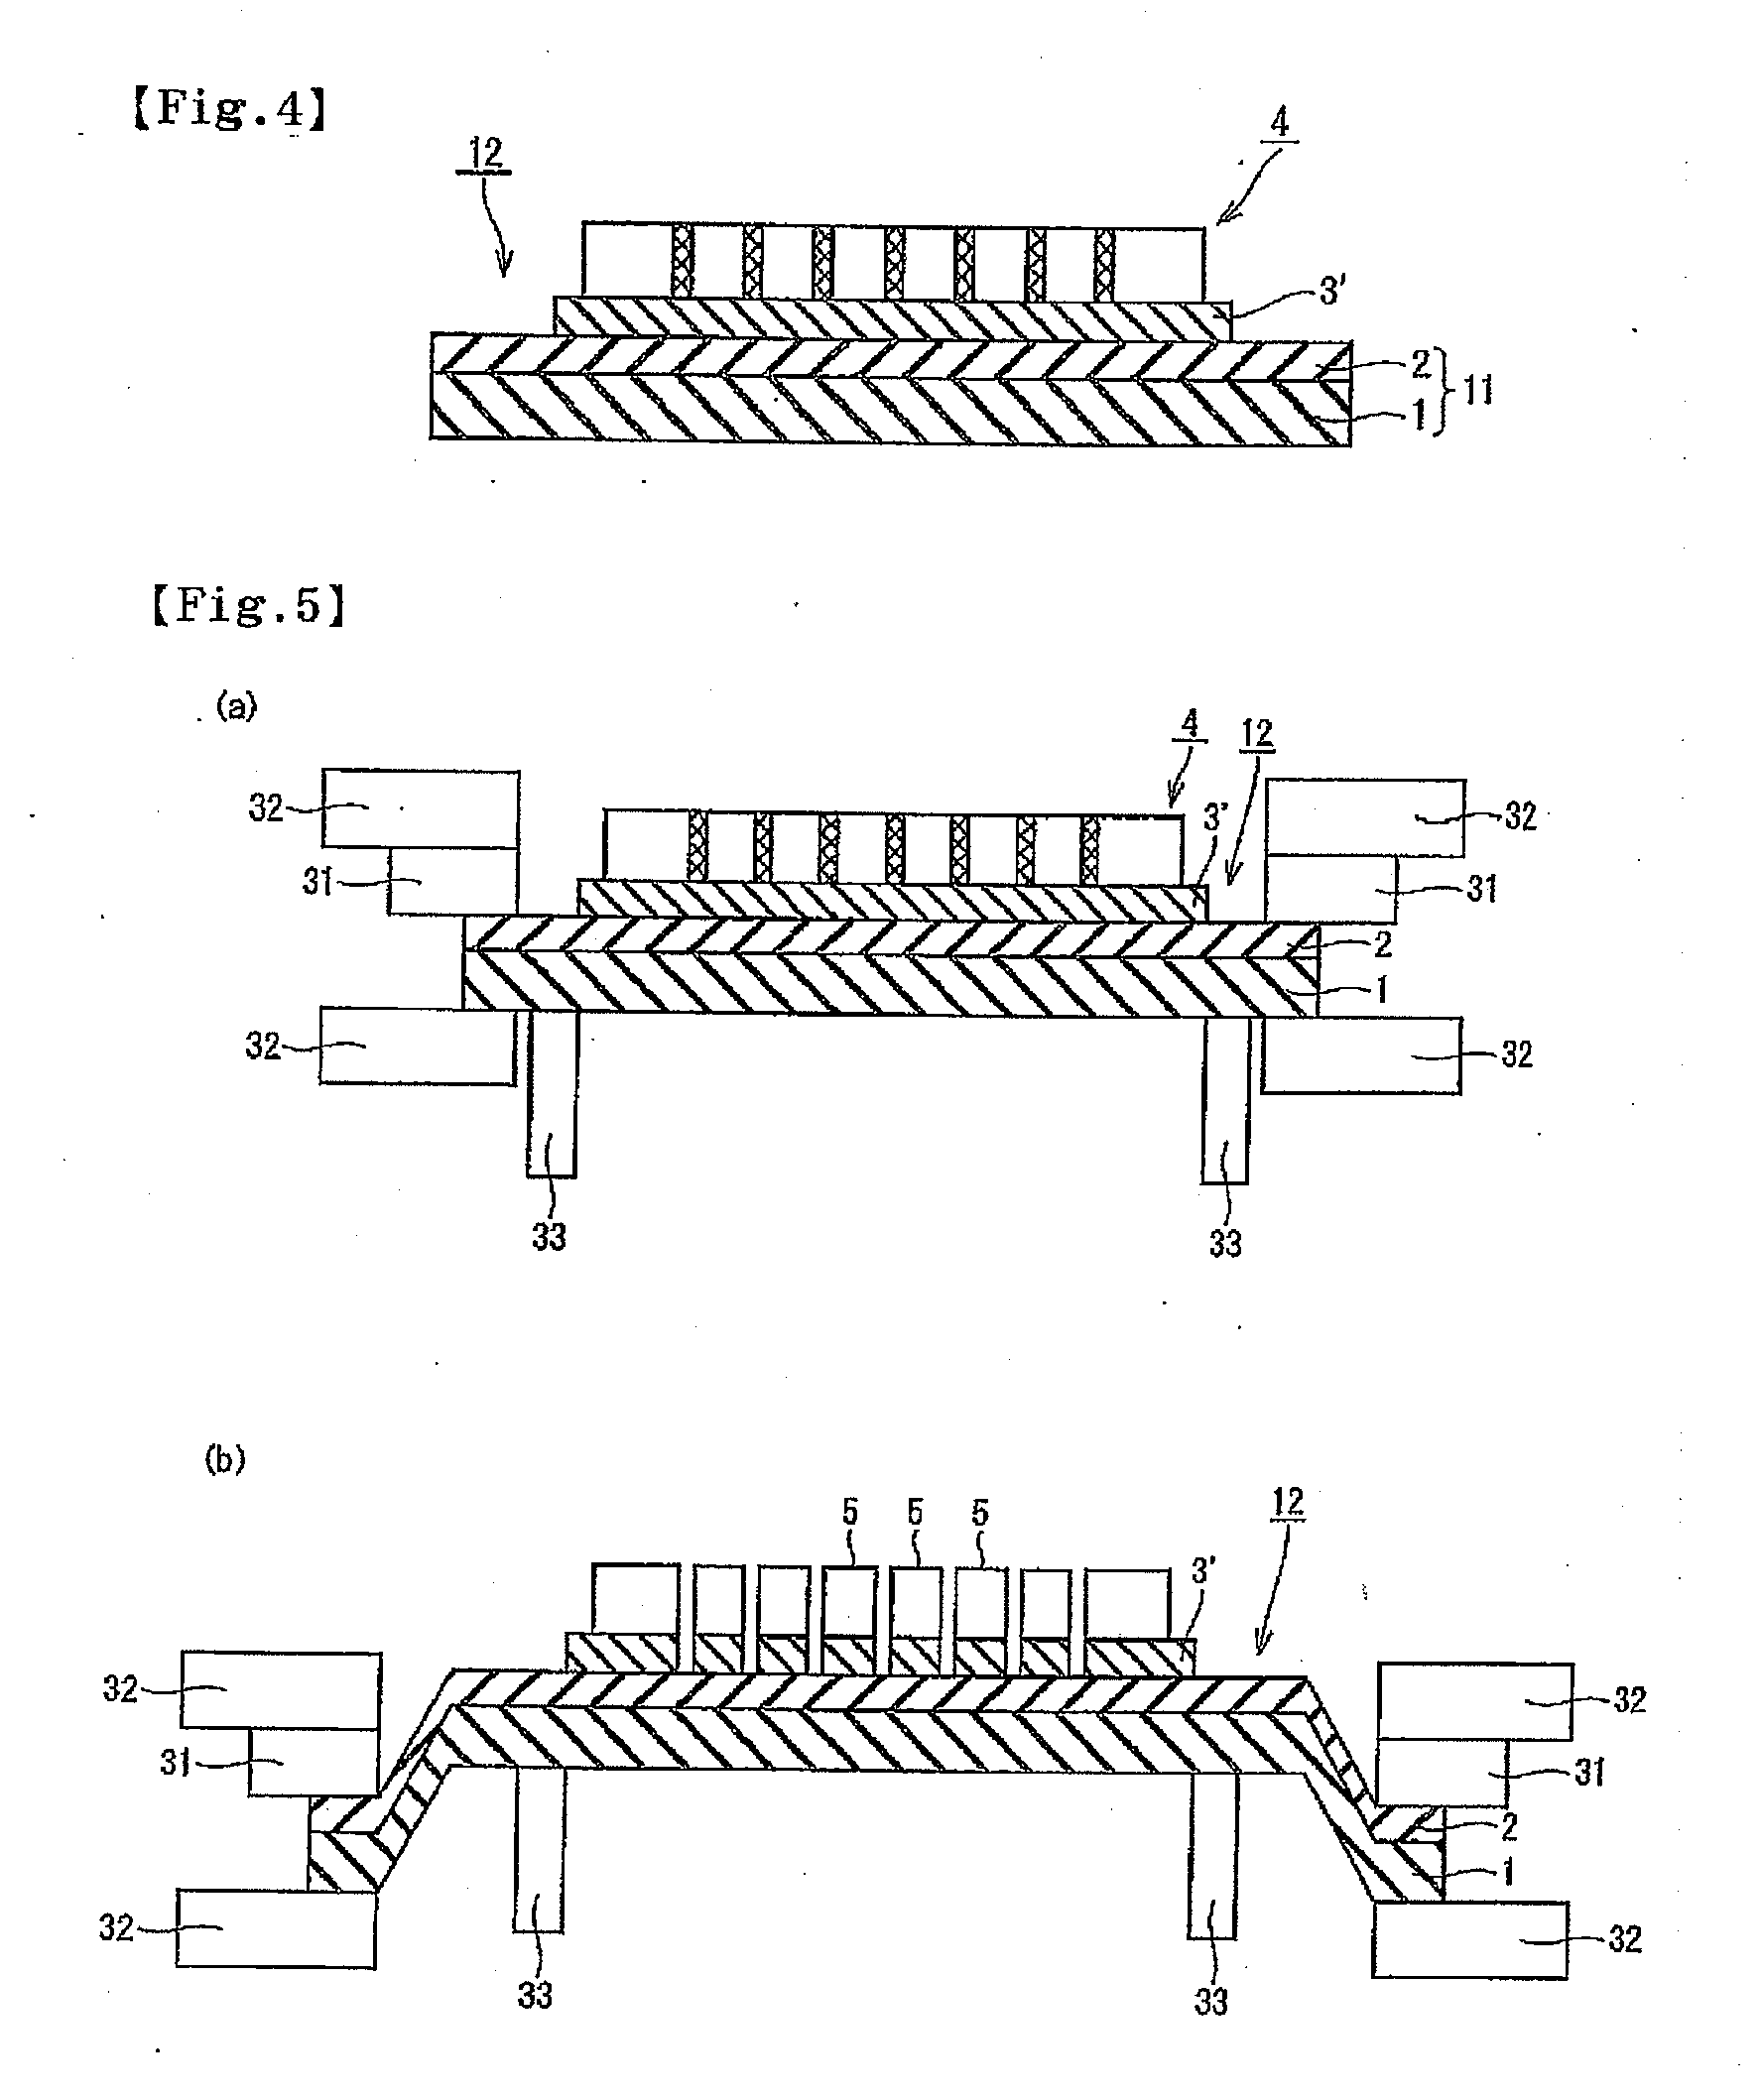 Thermosetting die bonding film, dicing die bonding film and semiconductor device